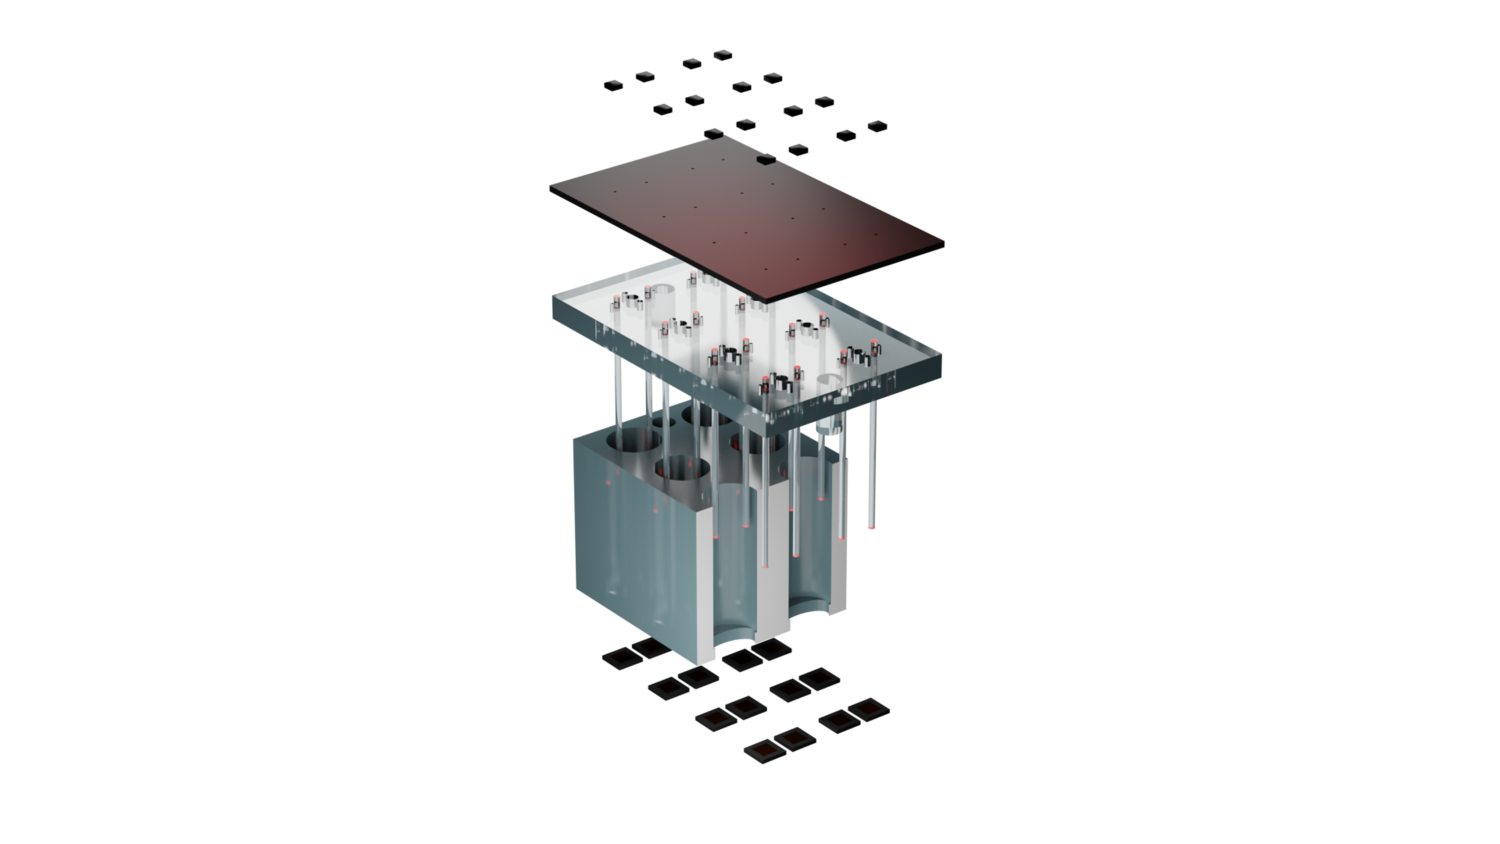 Representation of the planned chamber systems, where researchers use precise, optical fibre-based force and motion detection and piezo-based actuators to mimic the mechanical situation of different diseases.